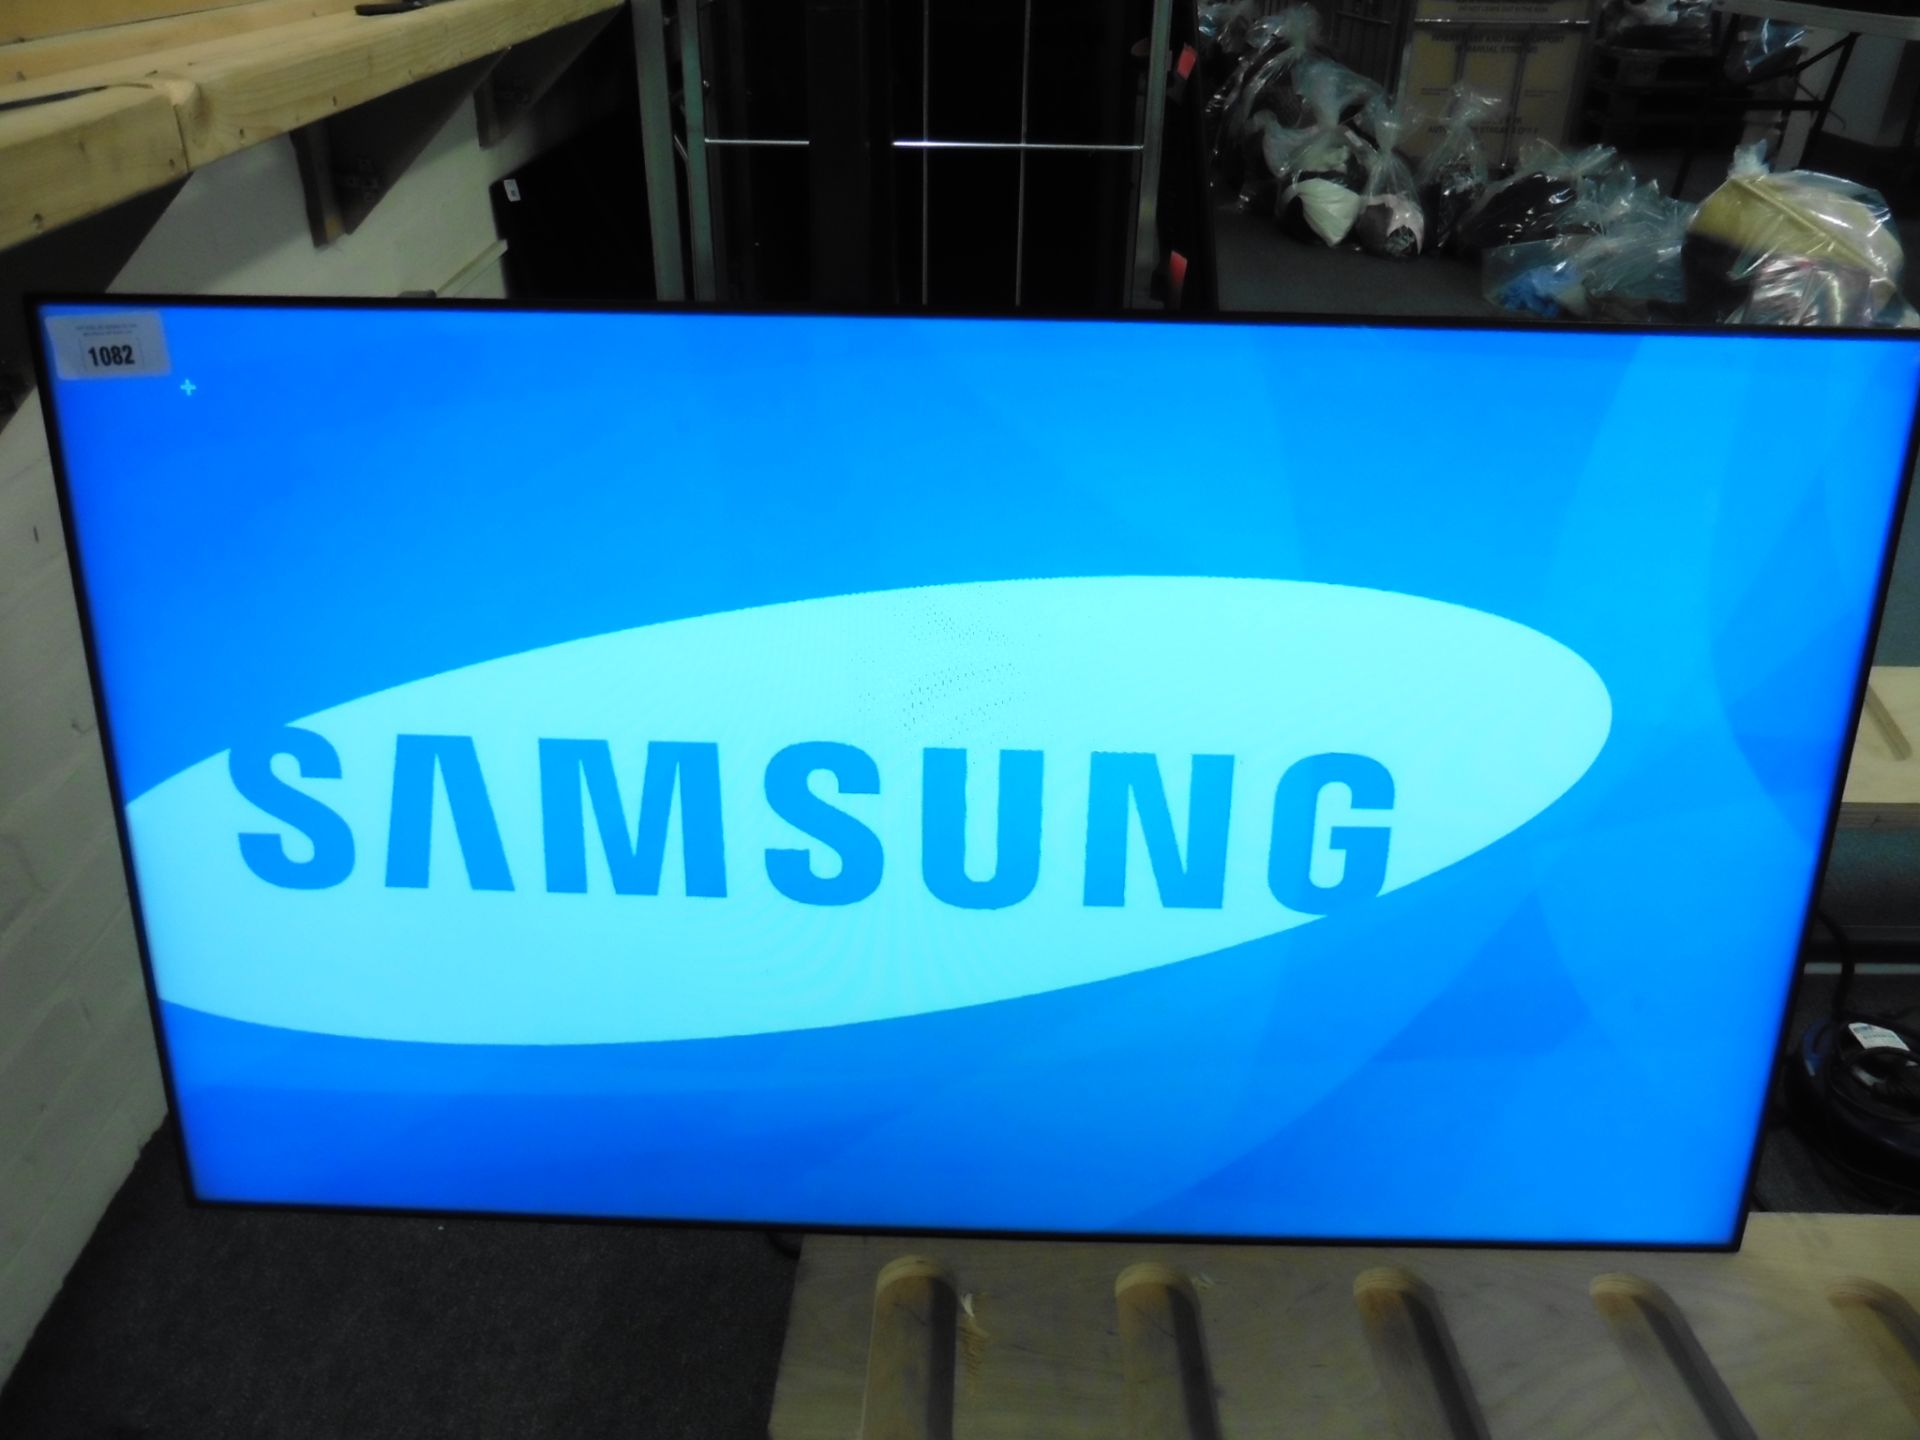 Samsung model UE46D colour display screen (manufactured 2015)